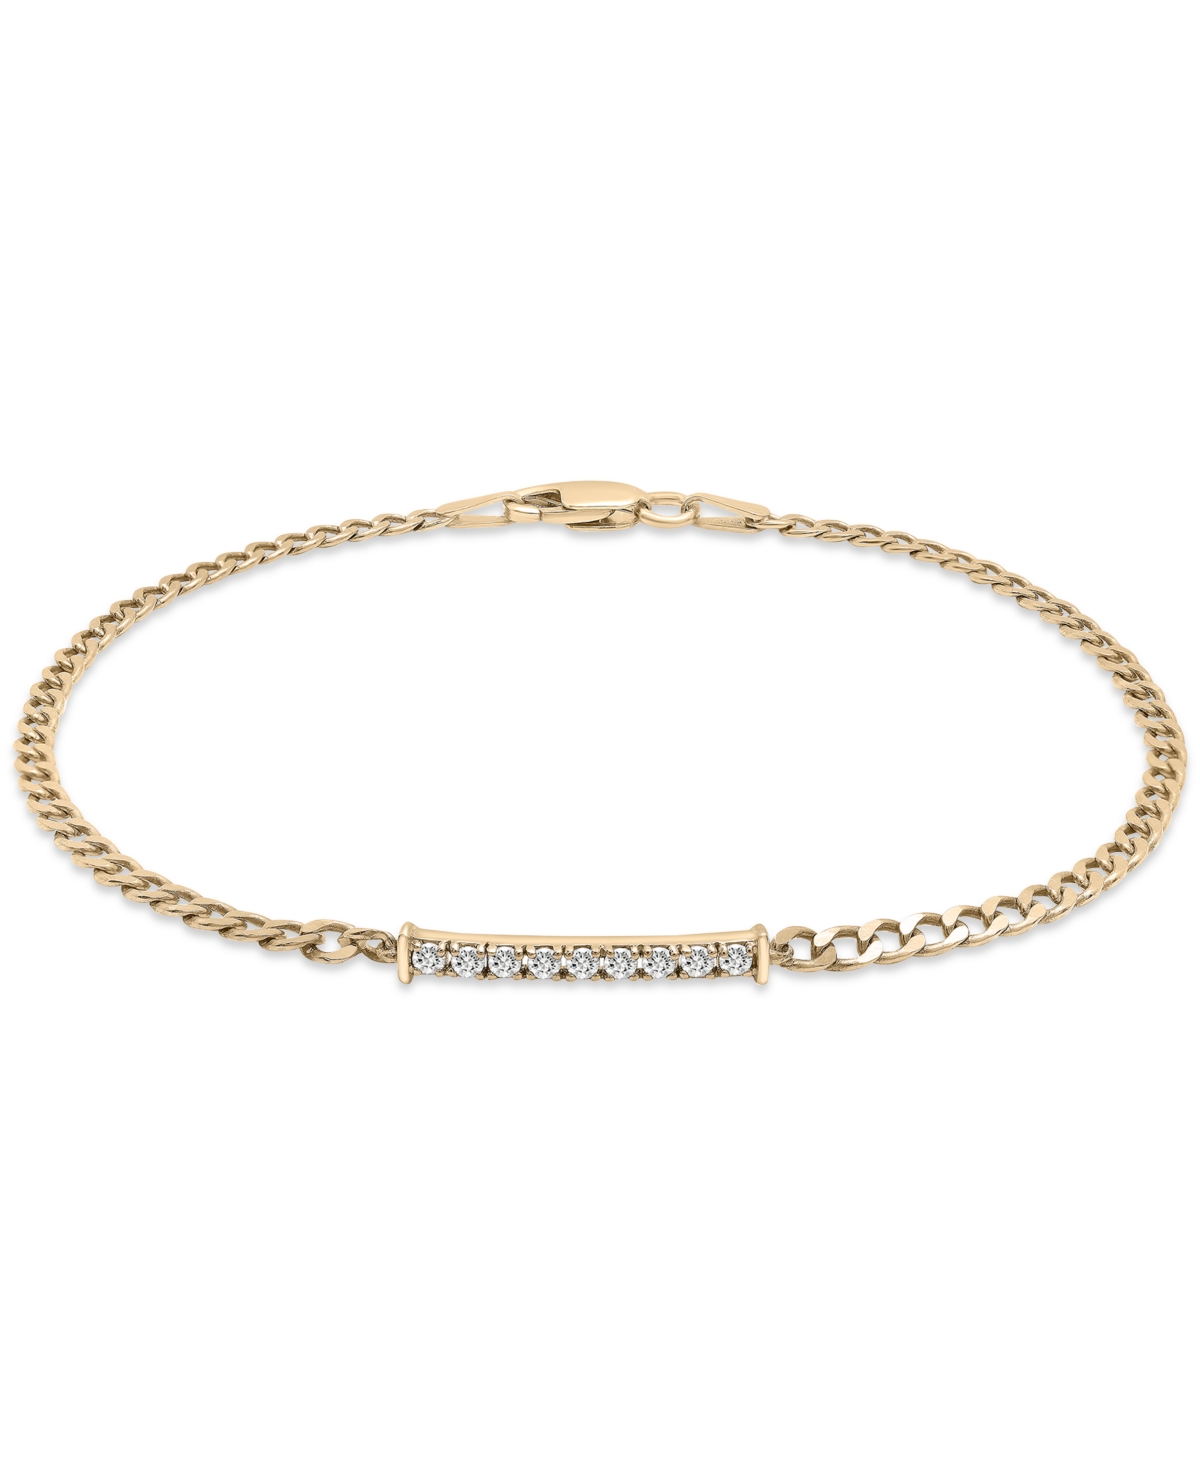 Diamond Bar Curb Link Bracelet (1/6 ct. t.w.) in Gold Vermeil, Created for Macy's - Gold Vermeil